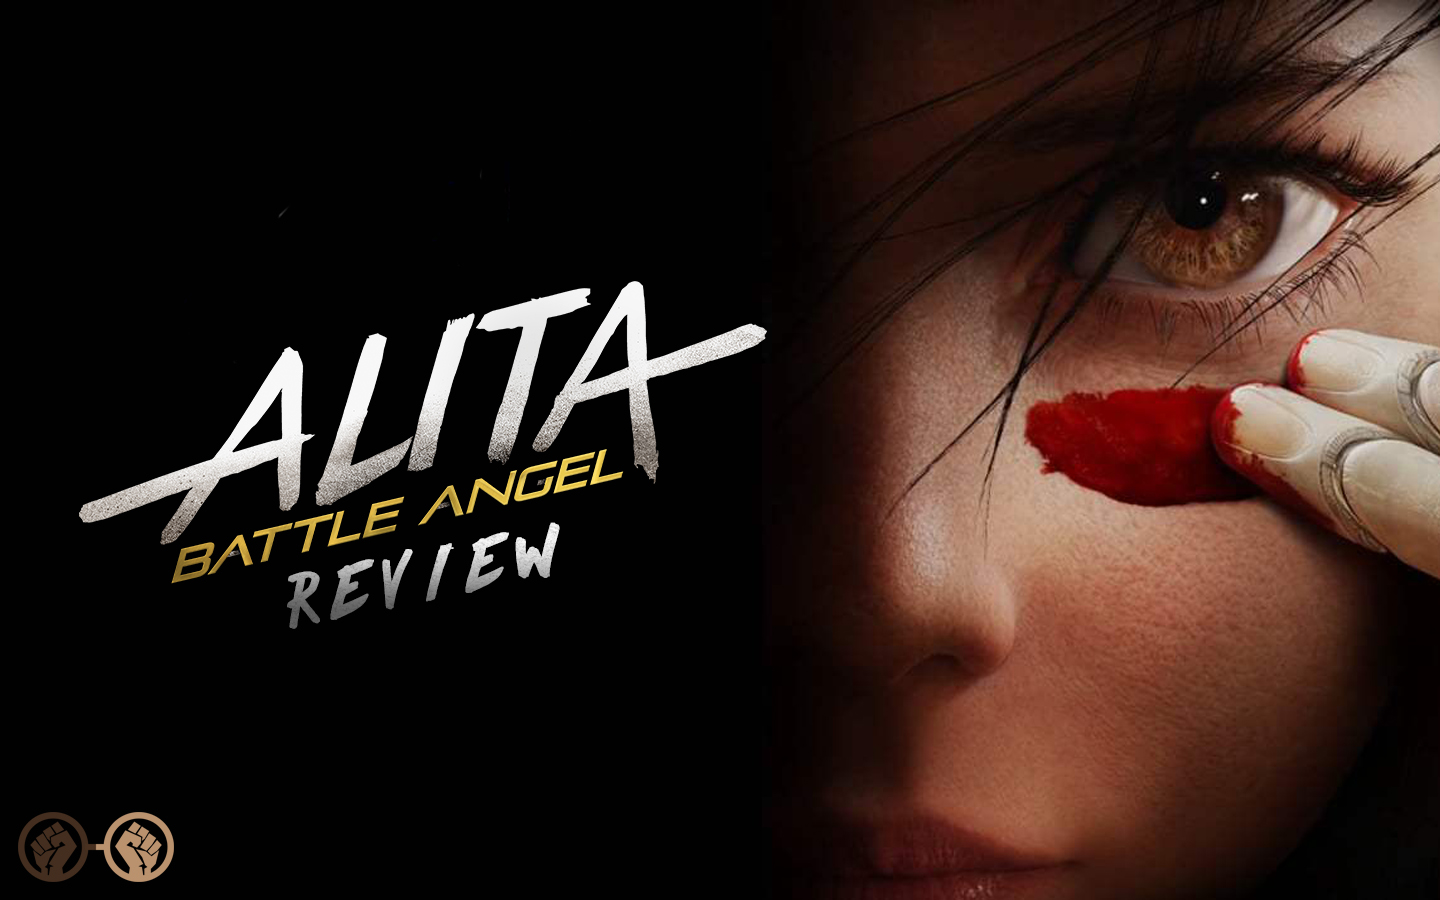 ‘Alita: Battle Angel’ Has Epic Action Sequences, Amazing Visual Effects and Motion Capture – Review